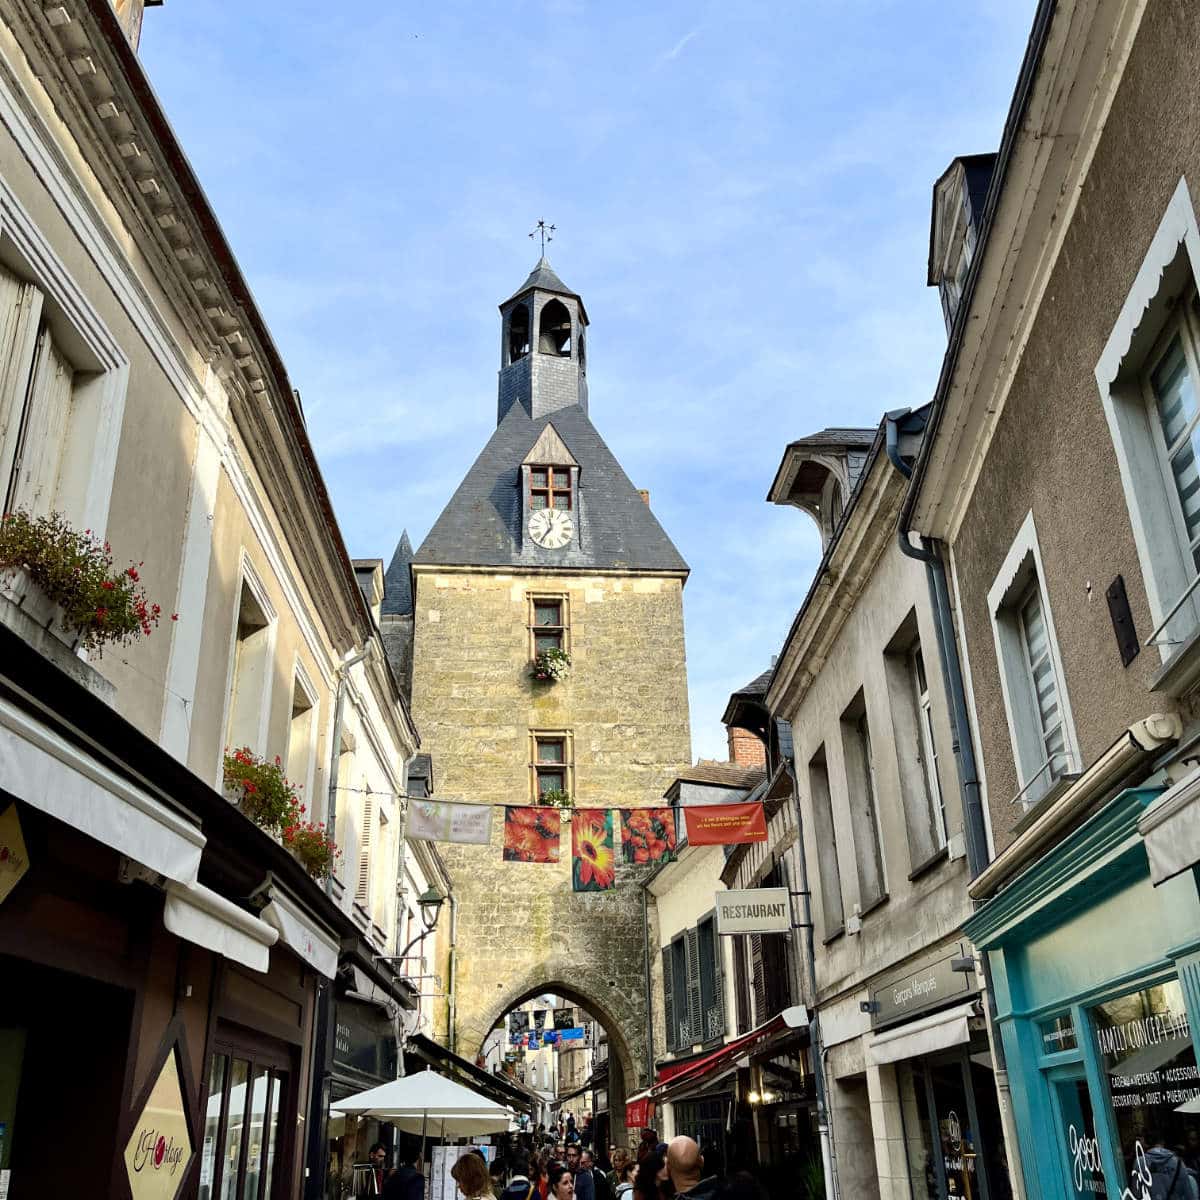 You are currently viewing Amboise: The Royal renaissance town of Leonardo Da Vinci (Loire Valley)